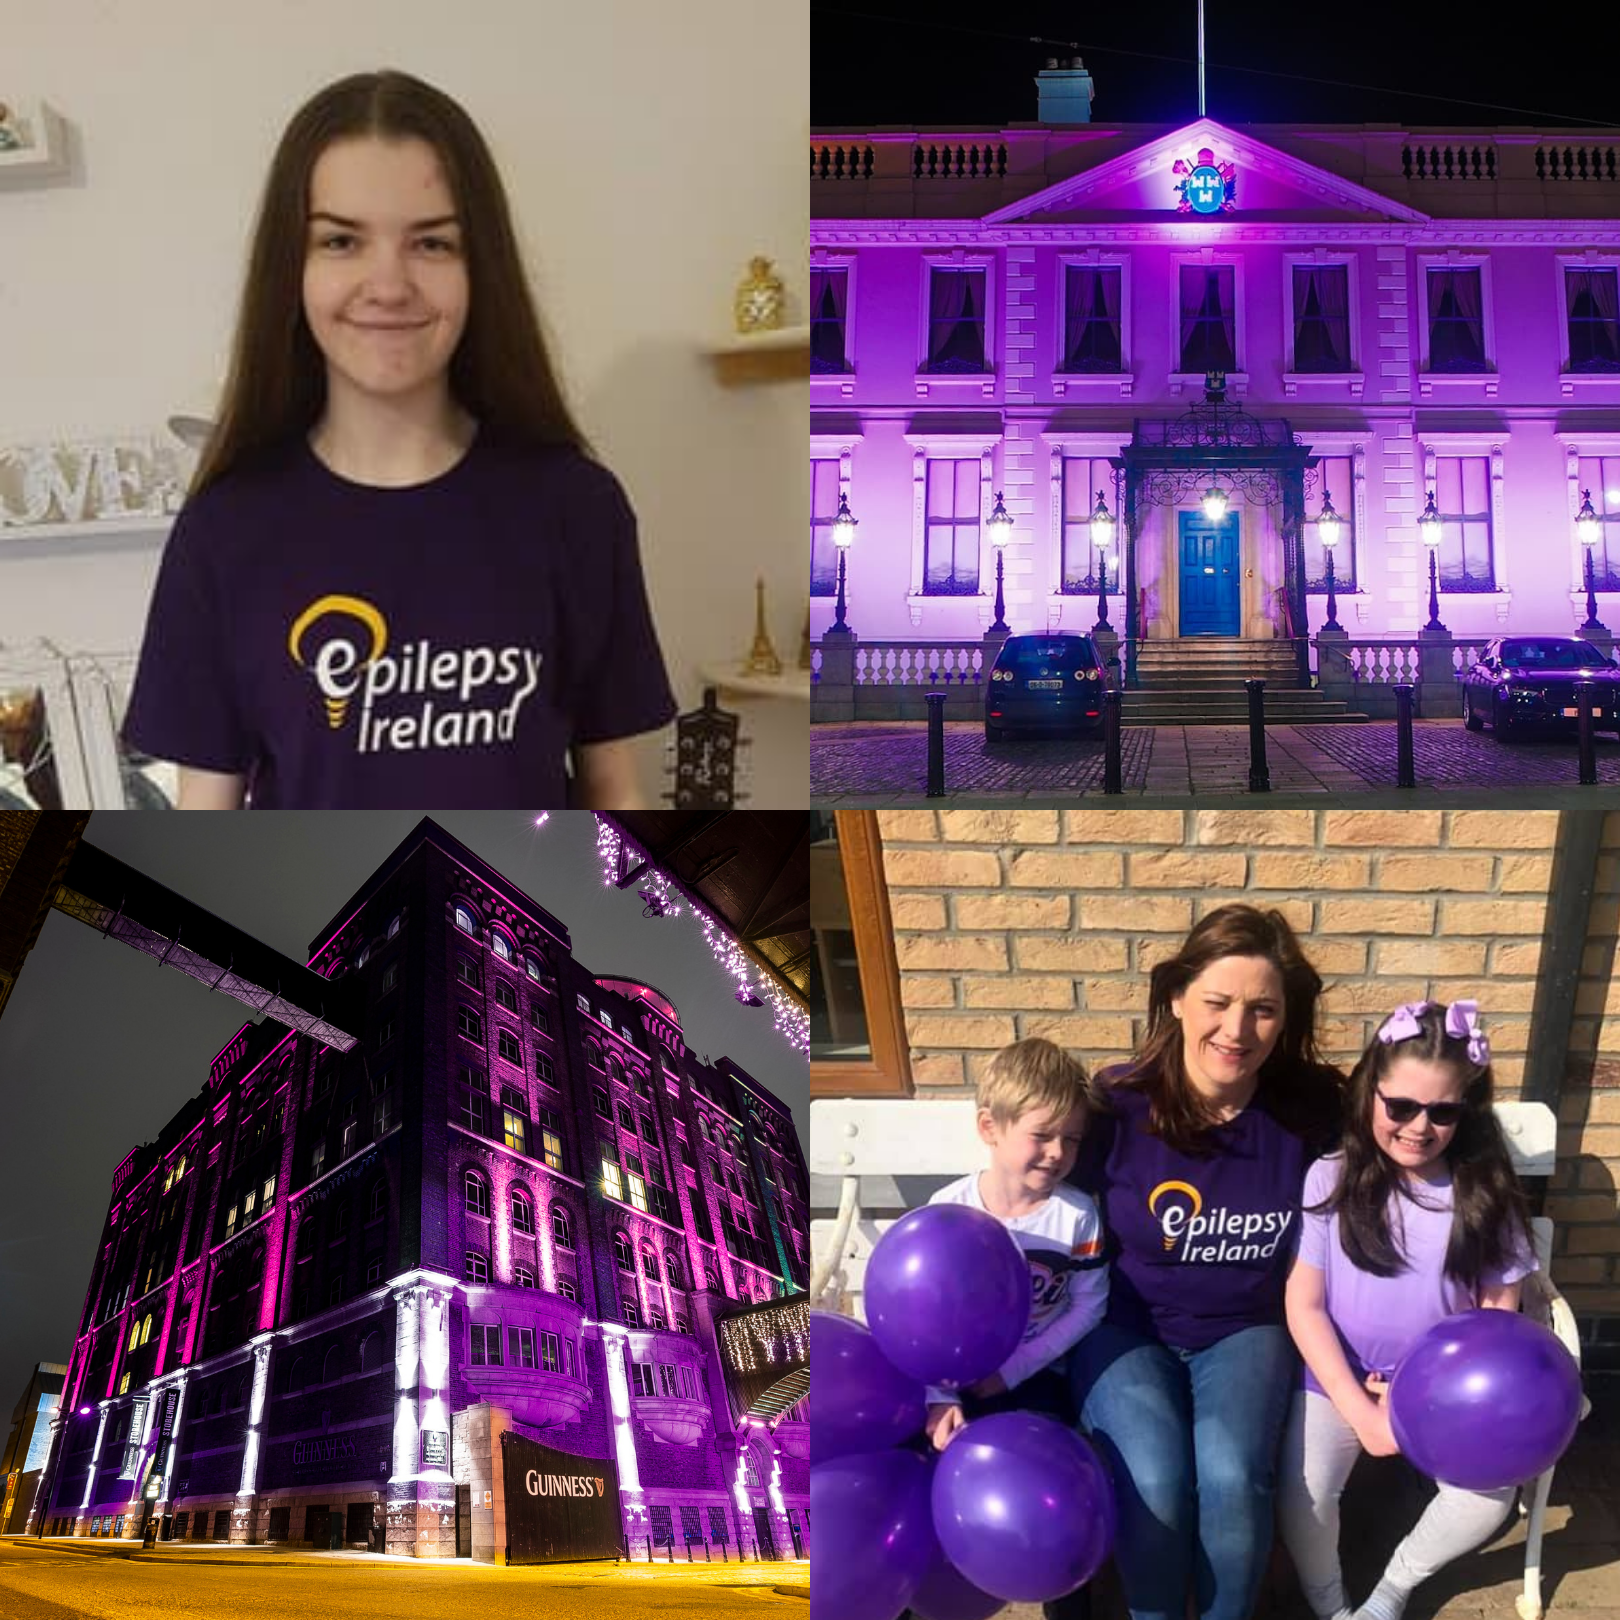 Purple Day® for epilepsy taking place on March 26th